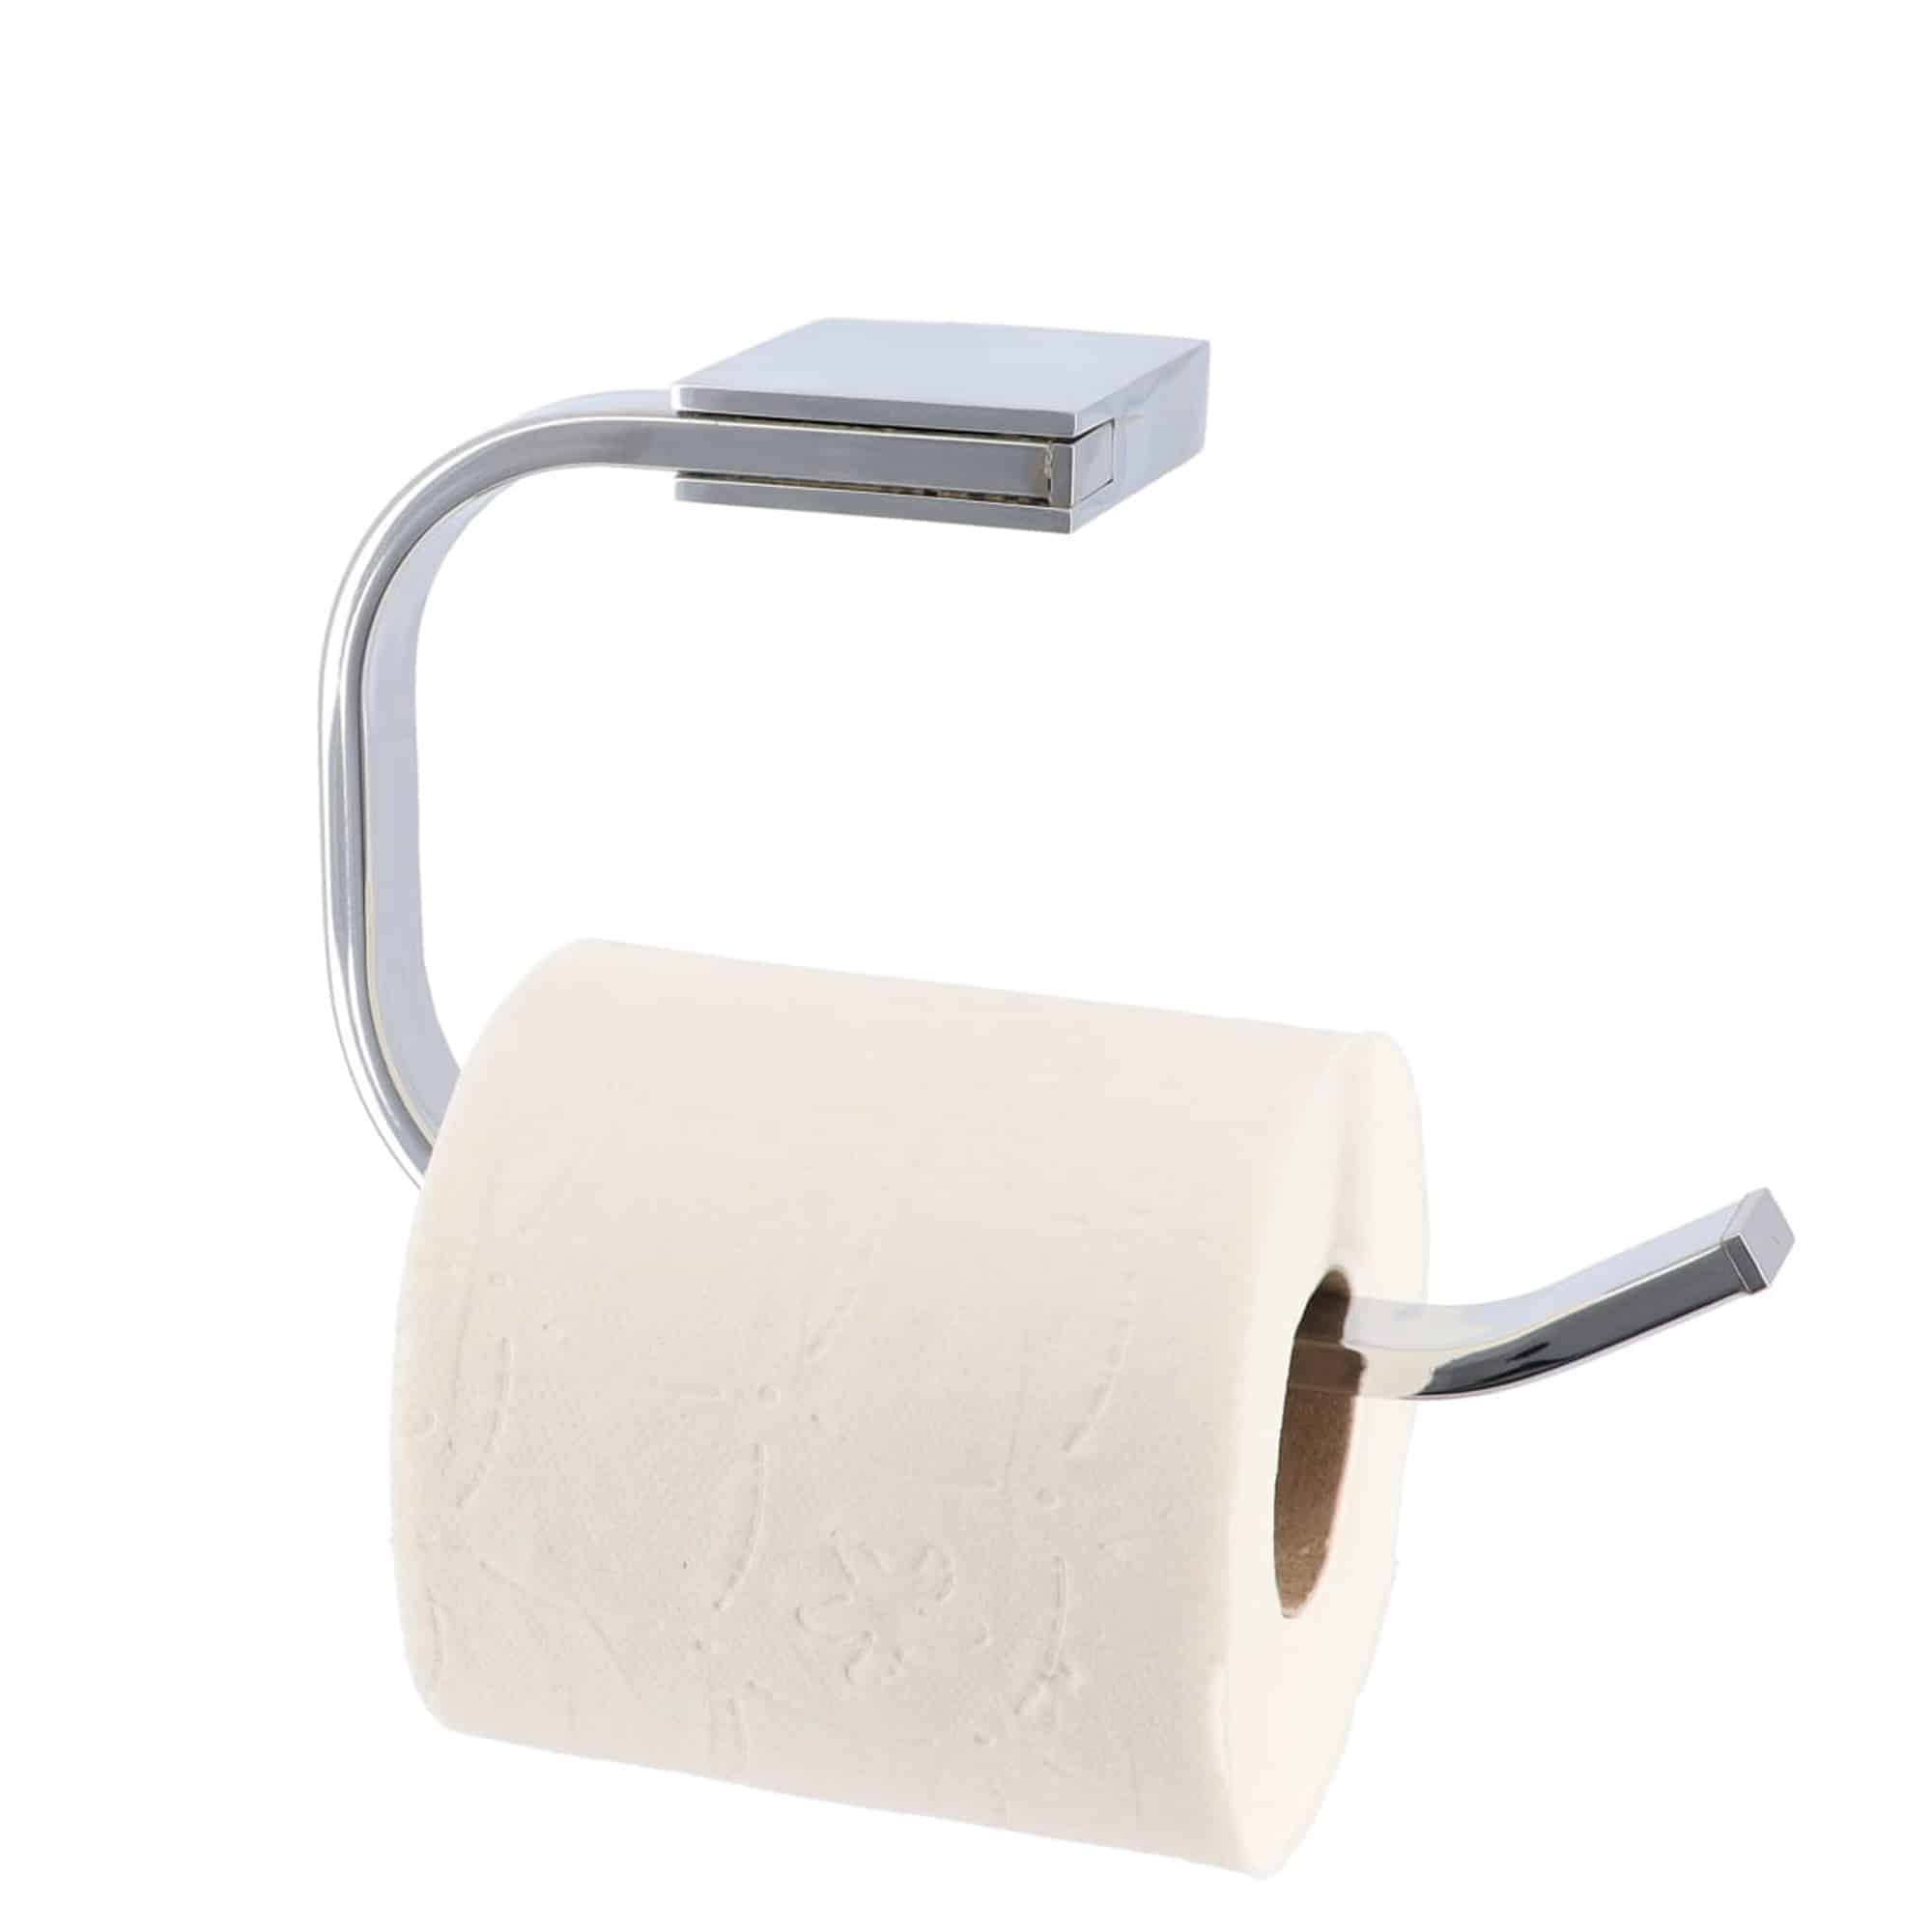 https://evideco.com/wp-content/uploads/2018/09/967199-Wall-Mounted-Toilet-Paper-Holder-1-Roll-Stainless-Steel-Chrome-5-1.jpg